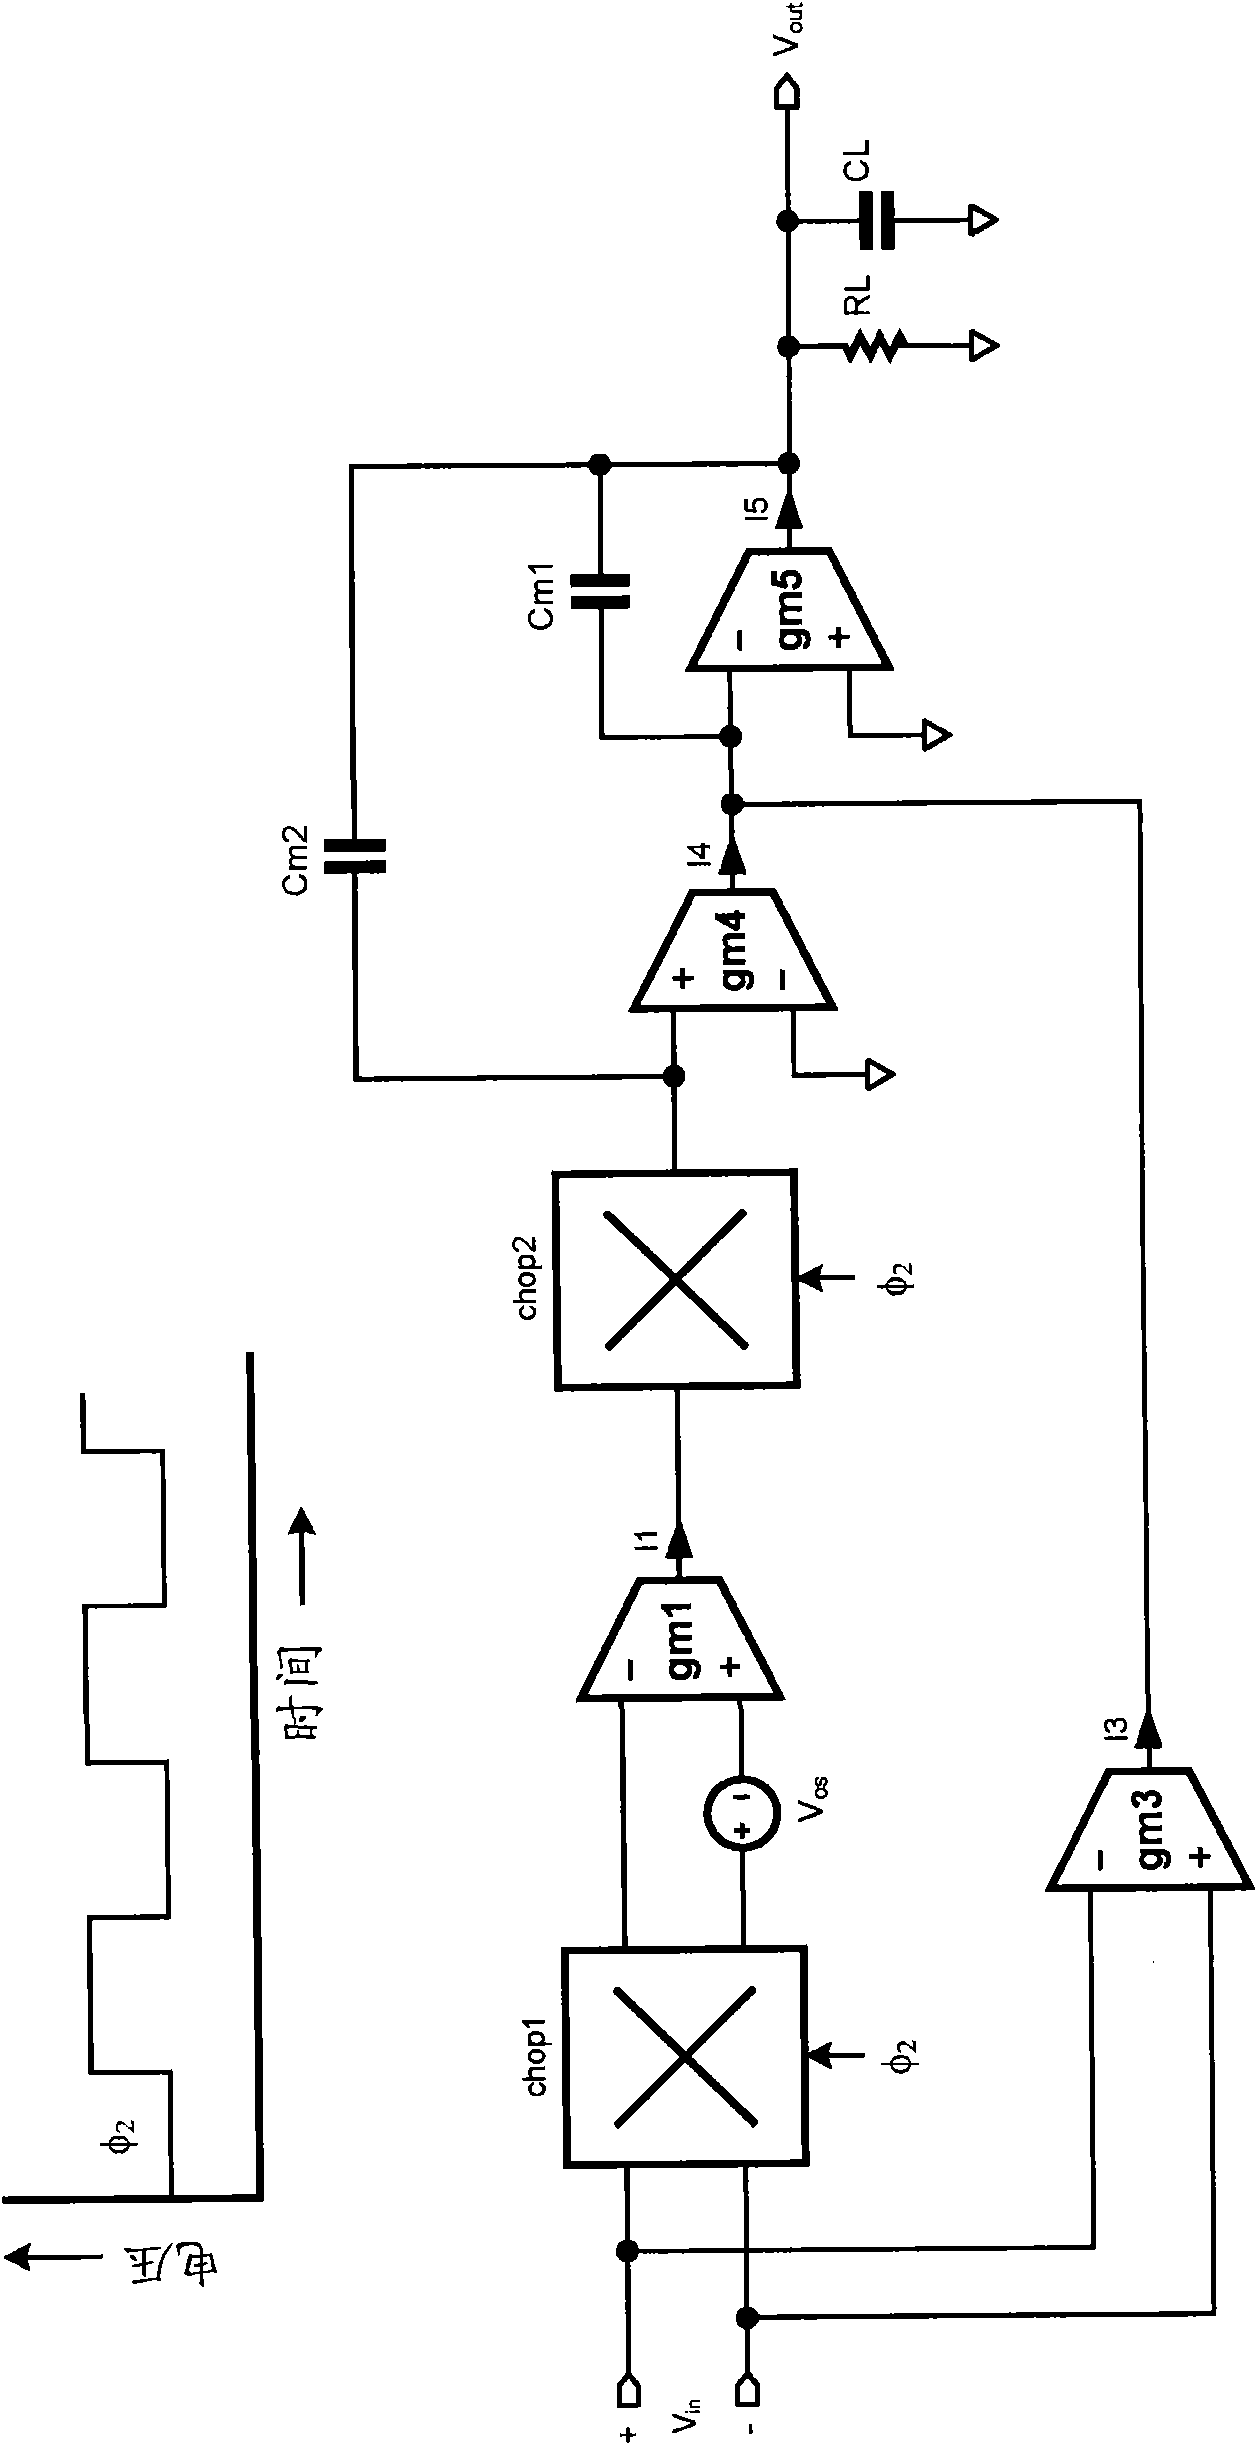 Low-noise, low-power, low drift offset correction in operational and instrumentation amplifiers